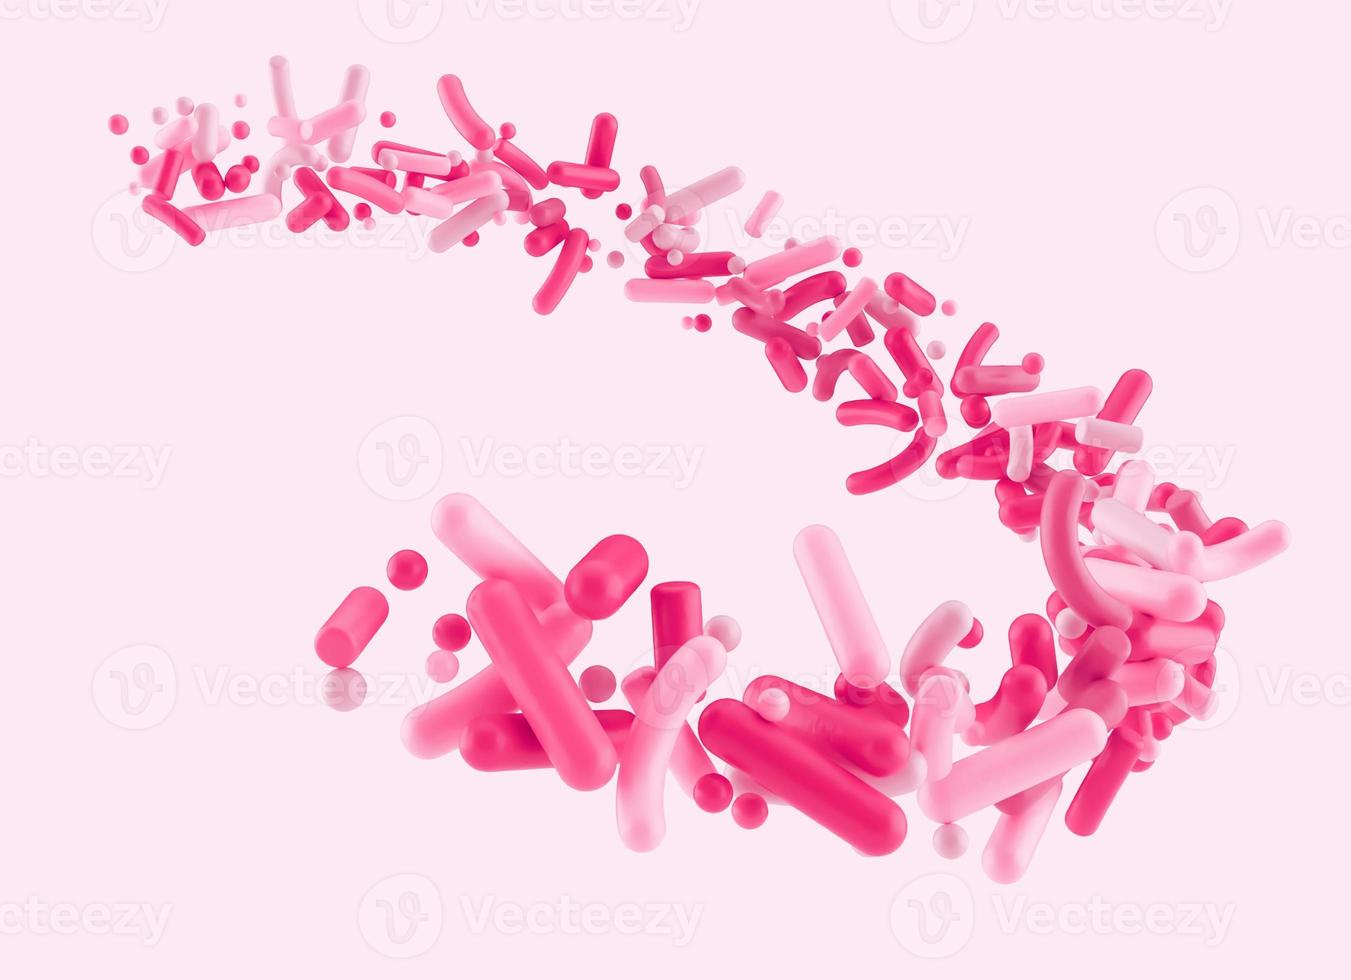 Pink Sprinkles in the air isolated on white background Sweet sprinkles flying 3d illustration photo